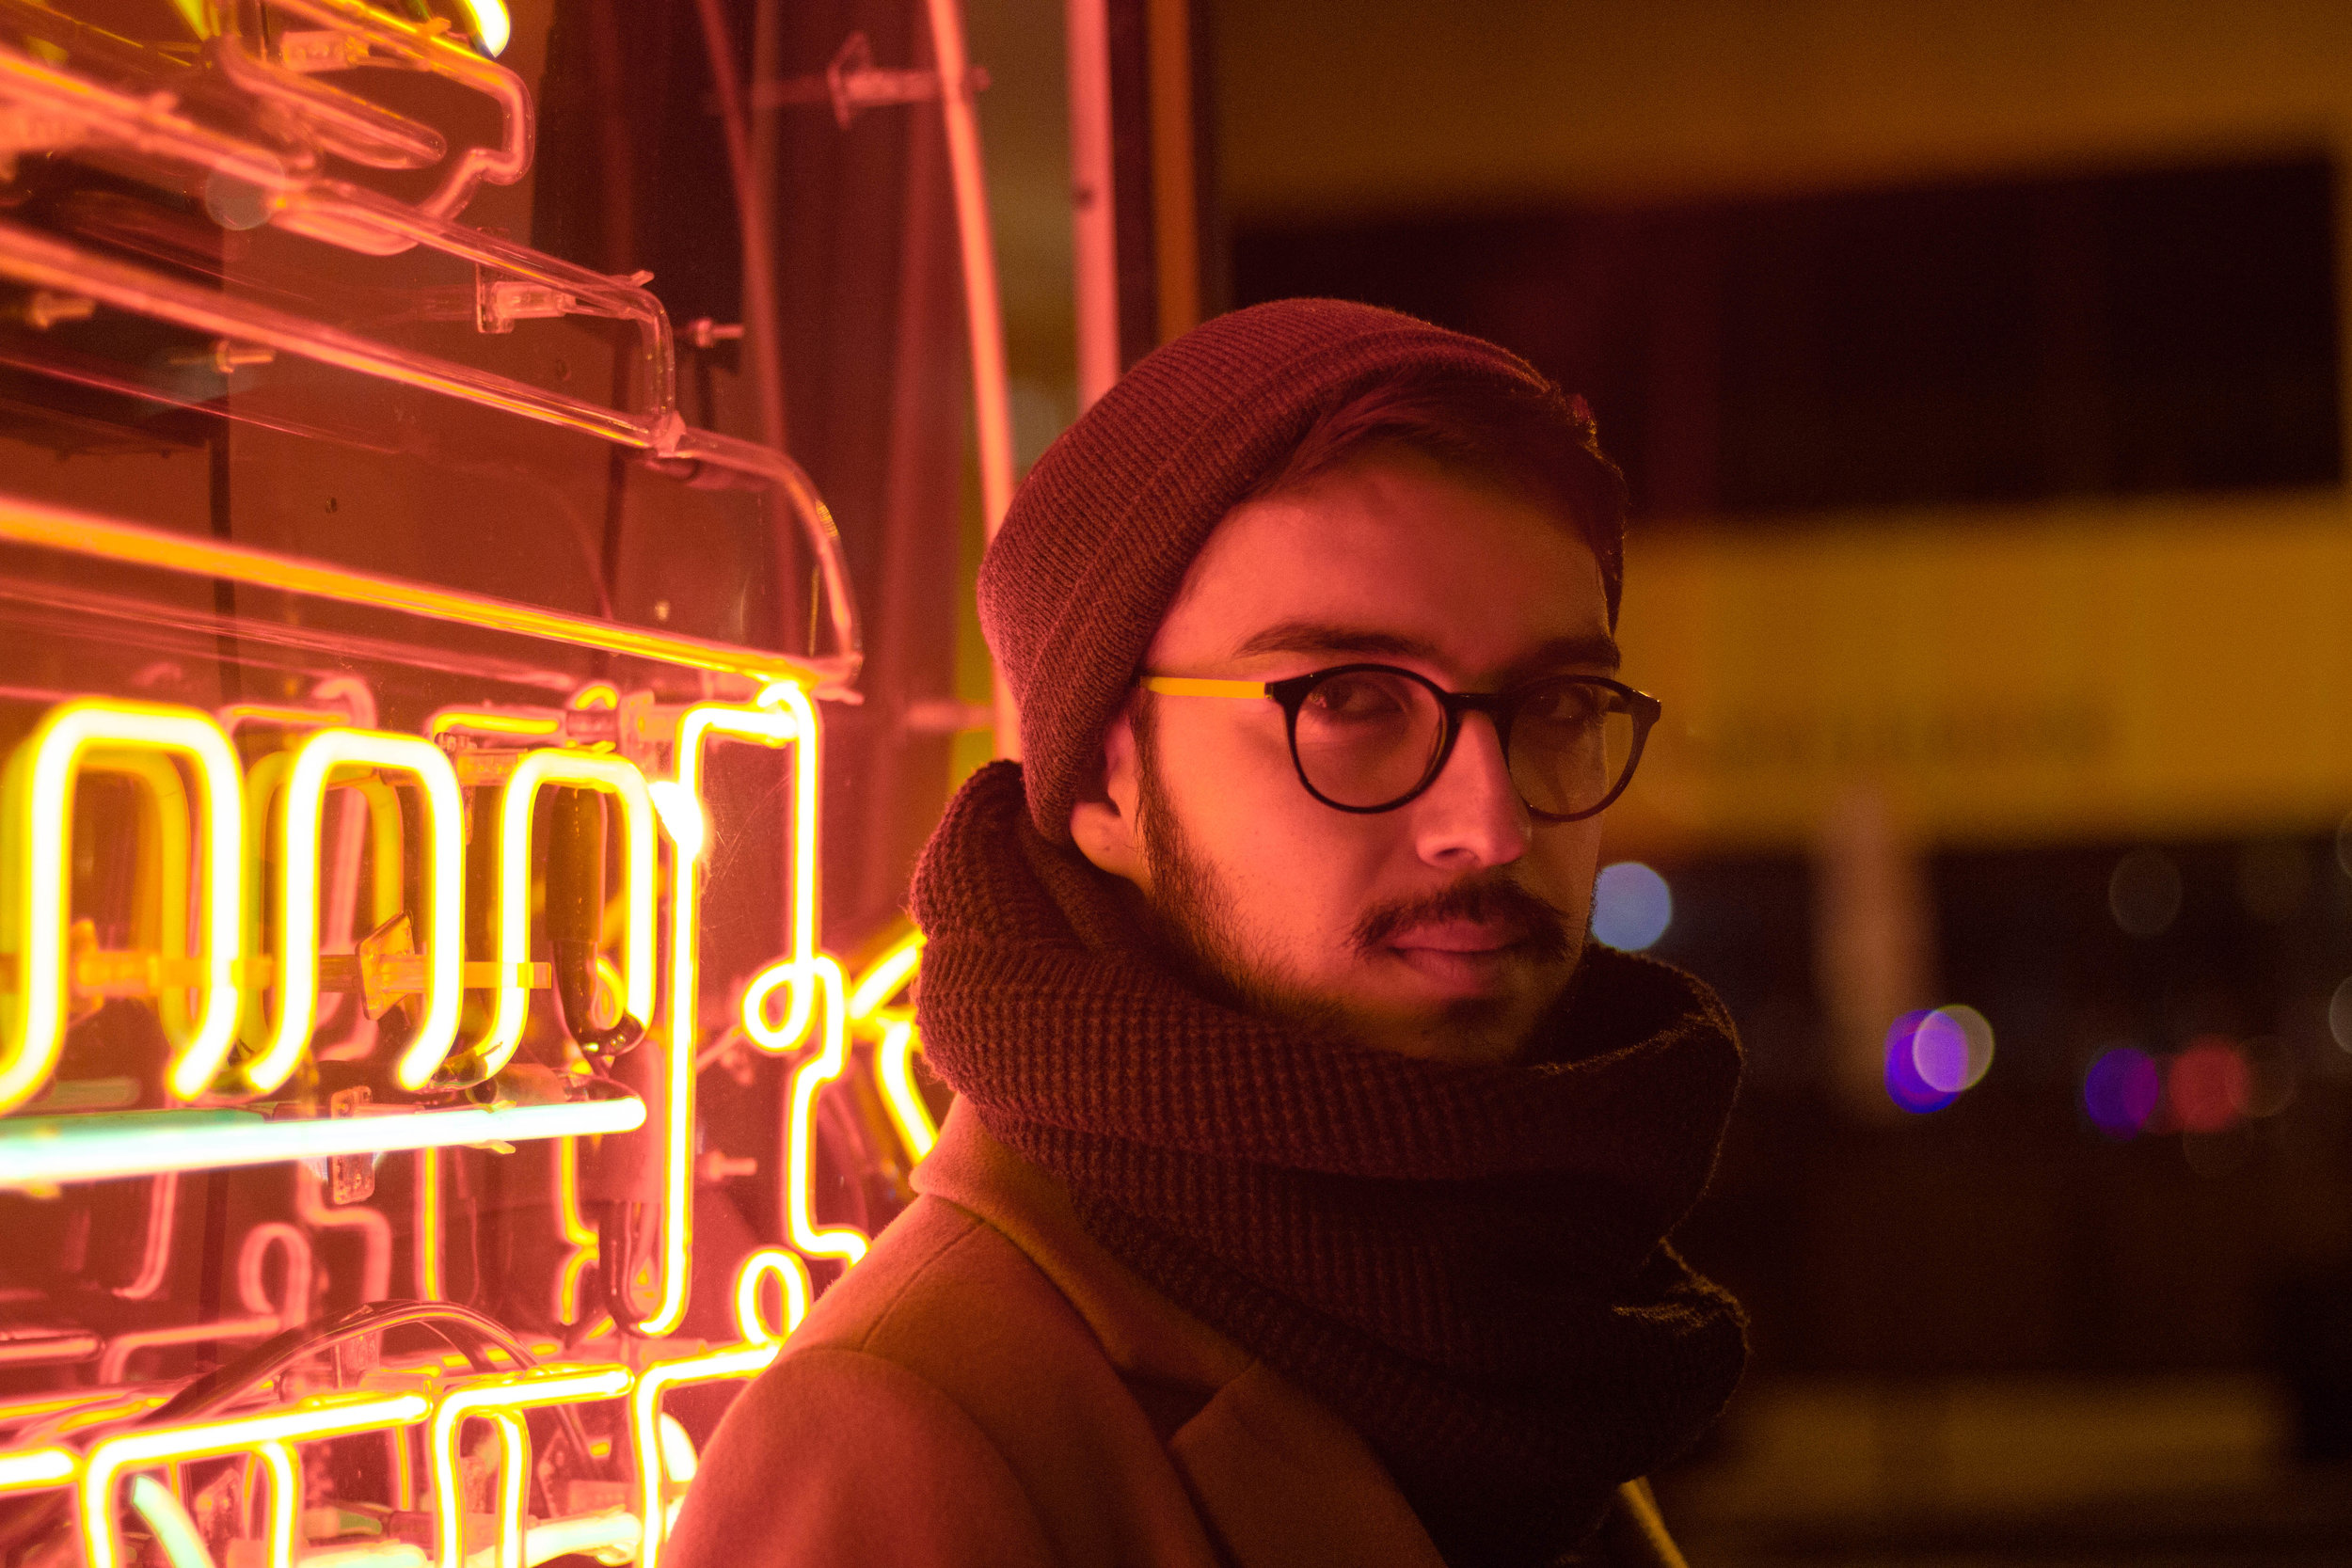  Man standing in front of red and orange neon sign. He is wearing glasses, a beanie, and a thick scarf. 